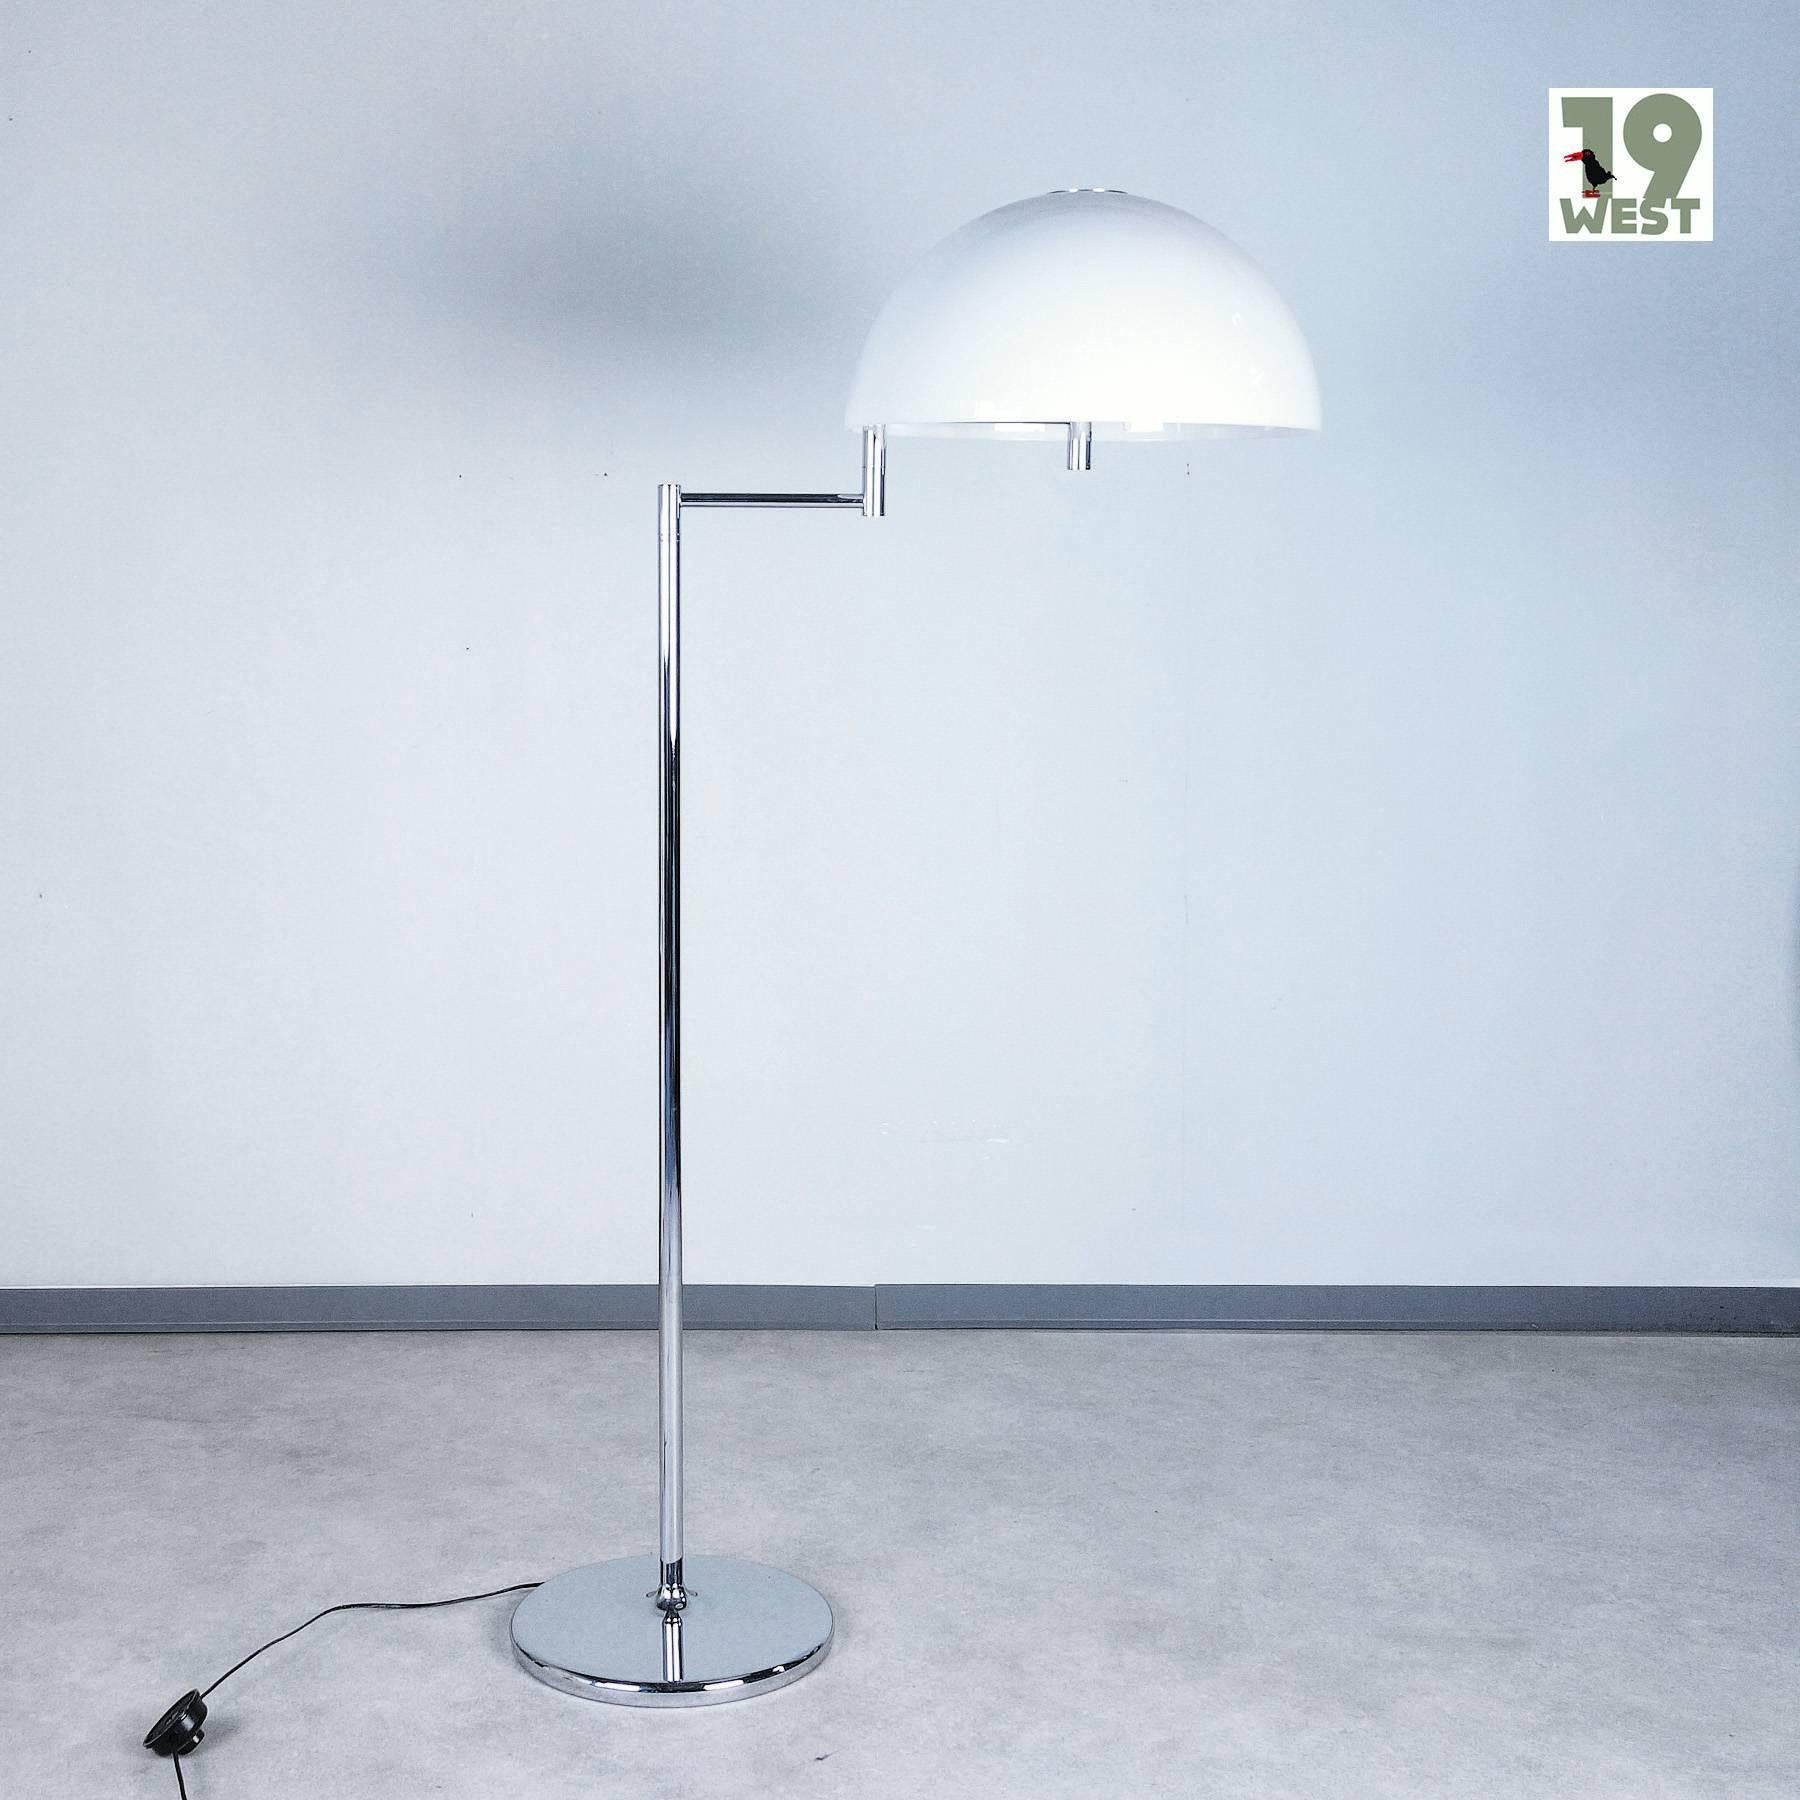 Floor lamp from the 1970s, manufactured by Swiss Lamps. Very nice model in Classic design, very high quality workmanship. The shade of the Luminaire can be swivelled.
 
The lamp is made of chrome-plated steel and white, slightly translucent